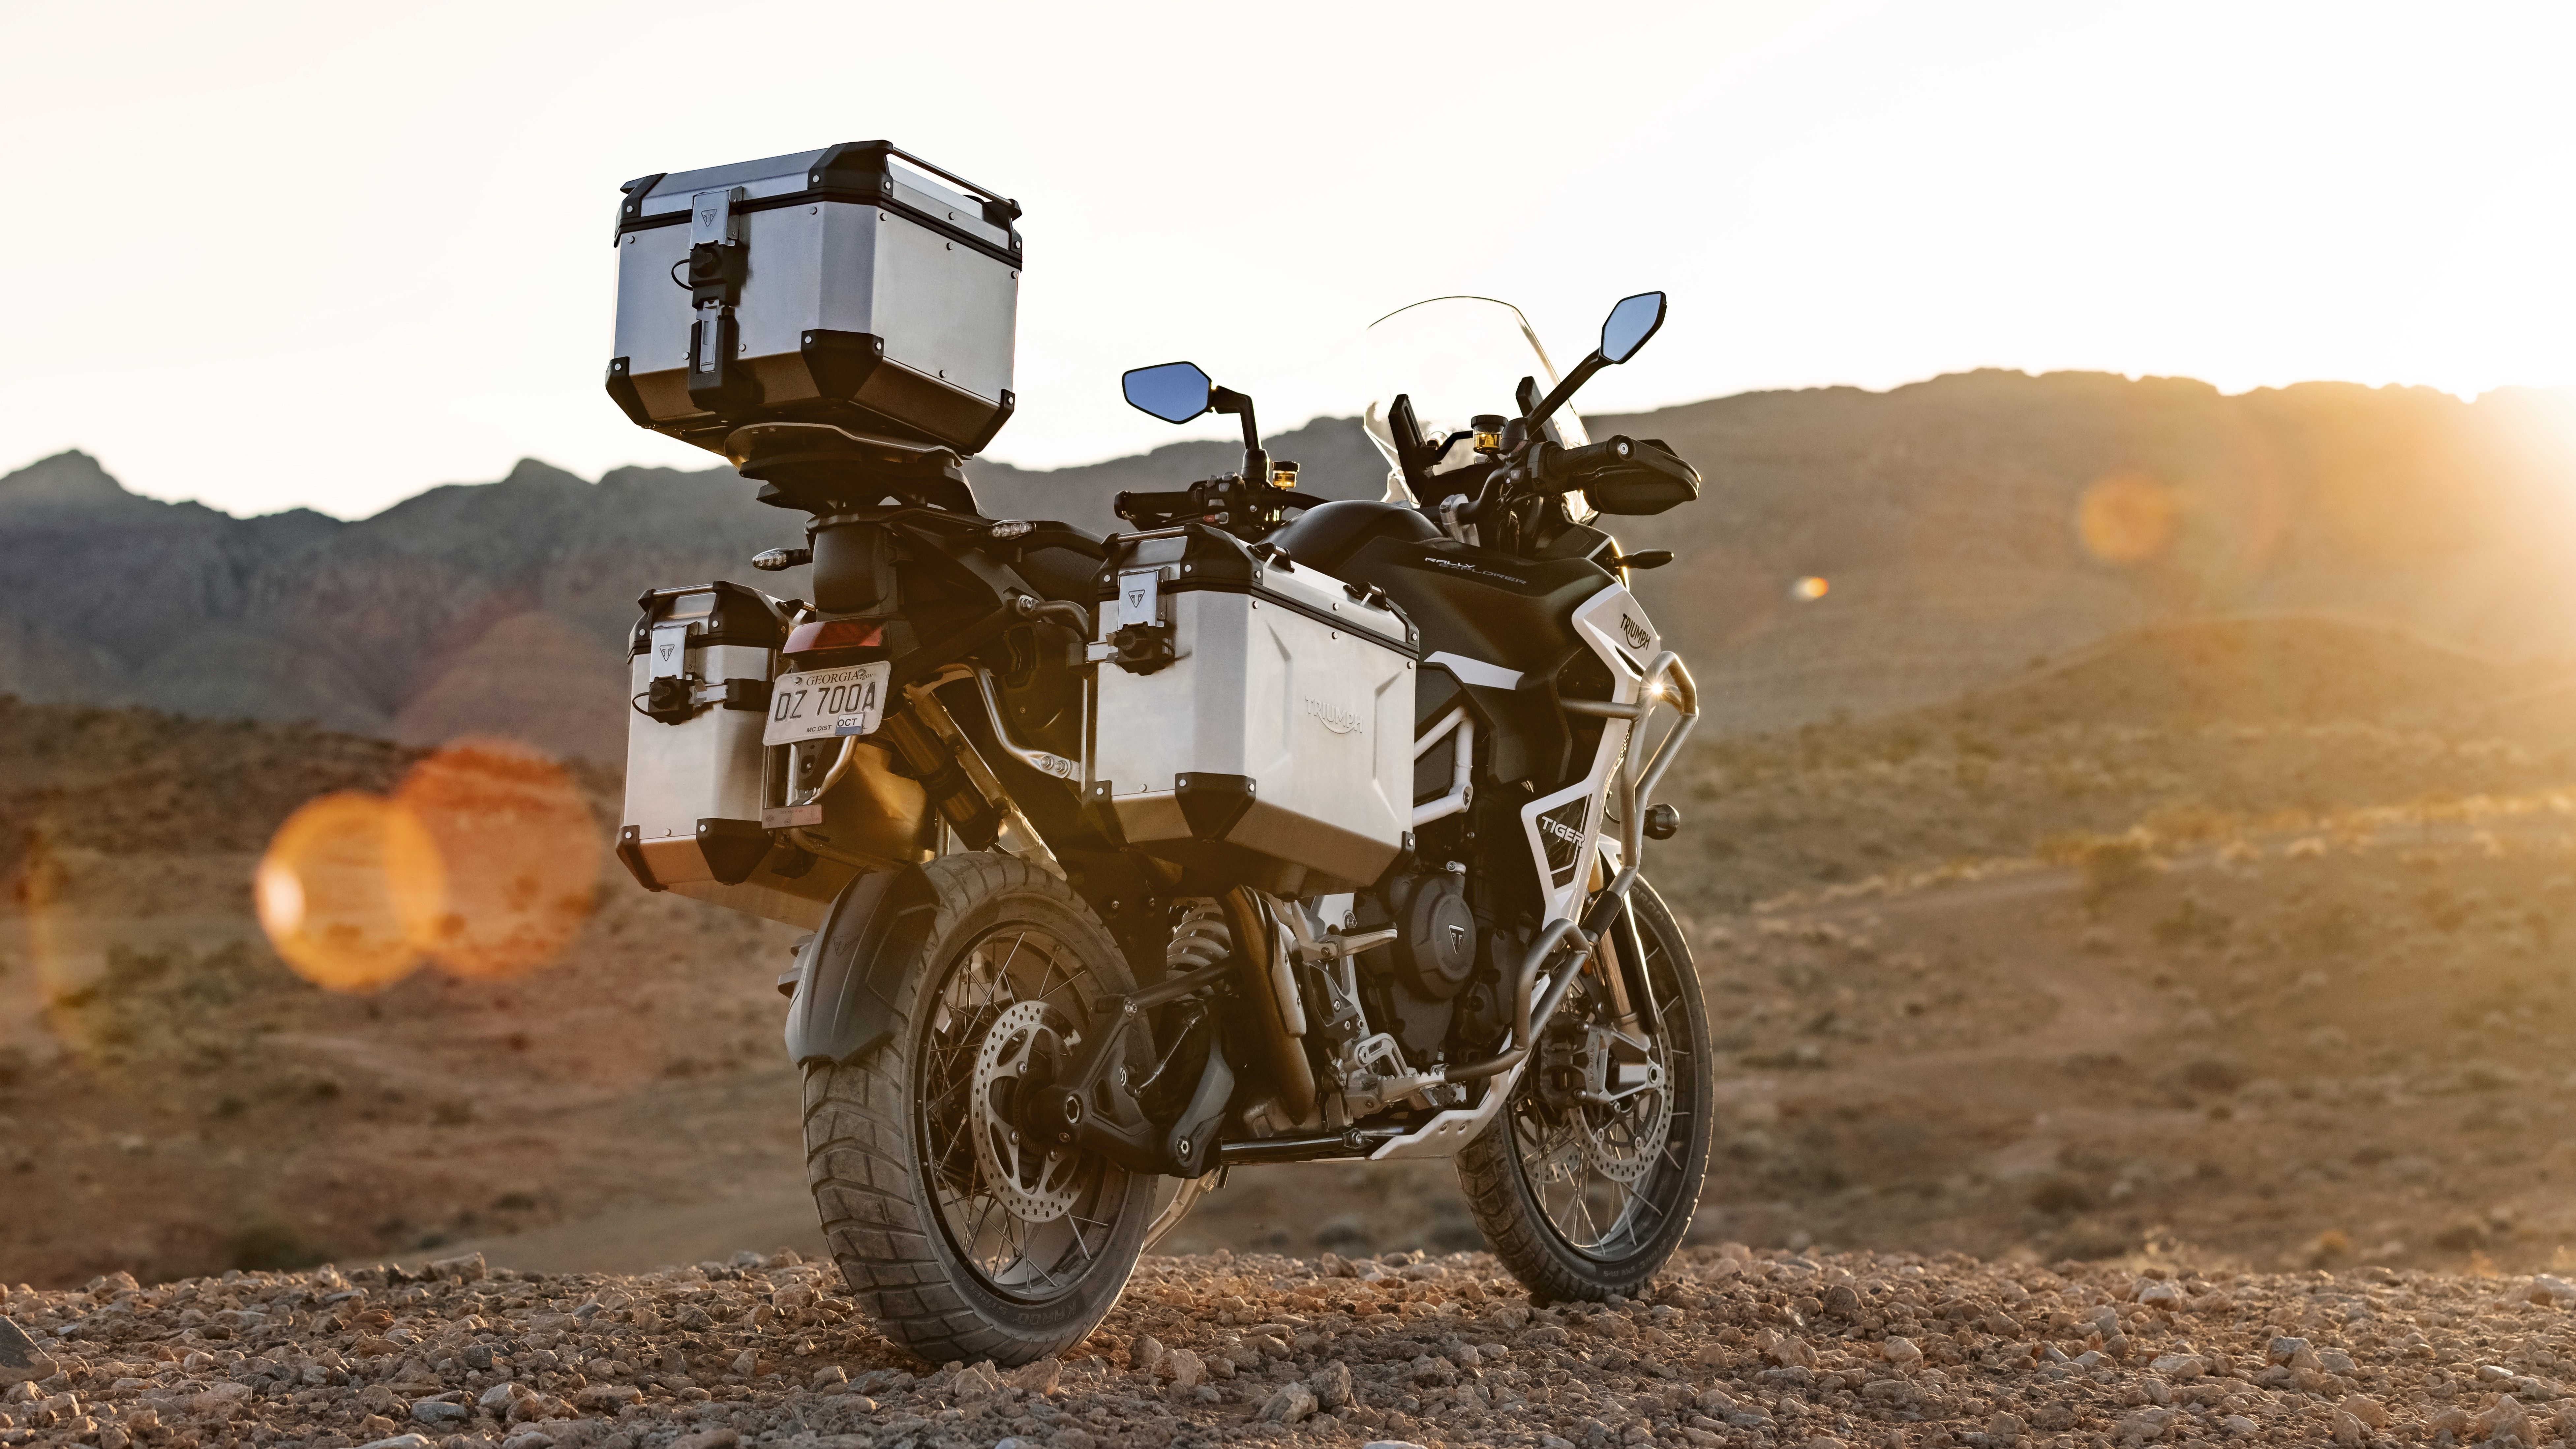 5 Best Adventure Motorcycle Soft Luggage Options For Your Next Trip